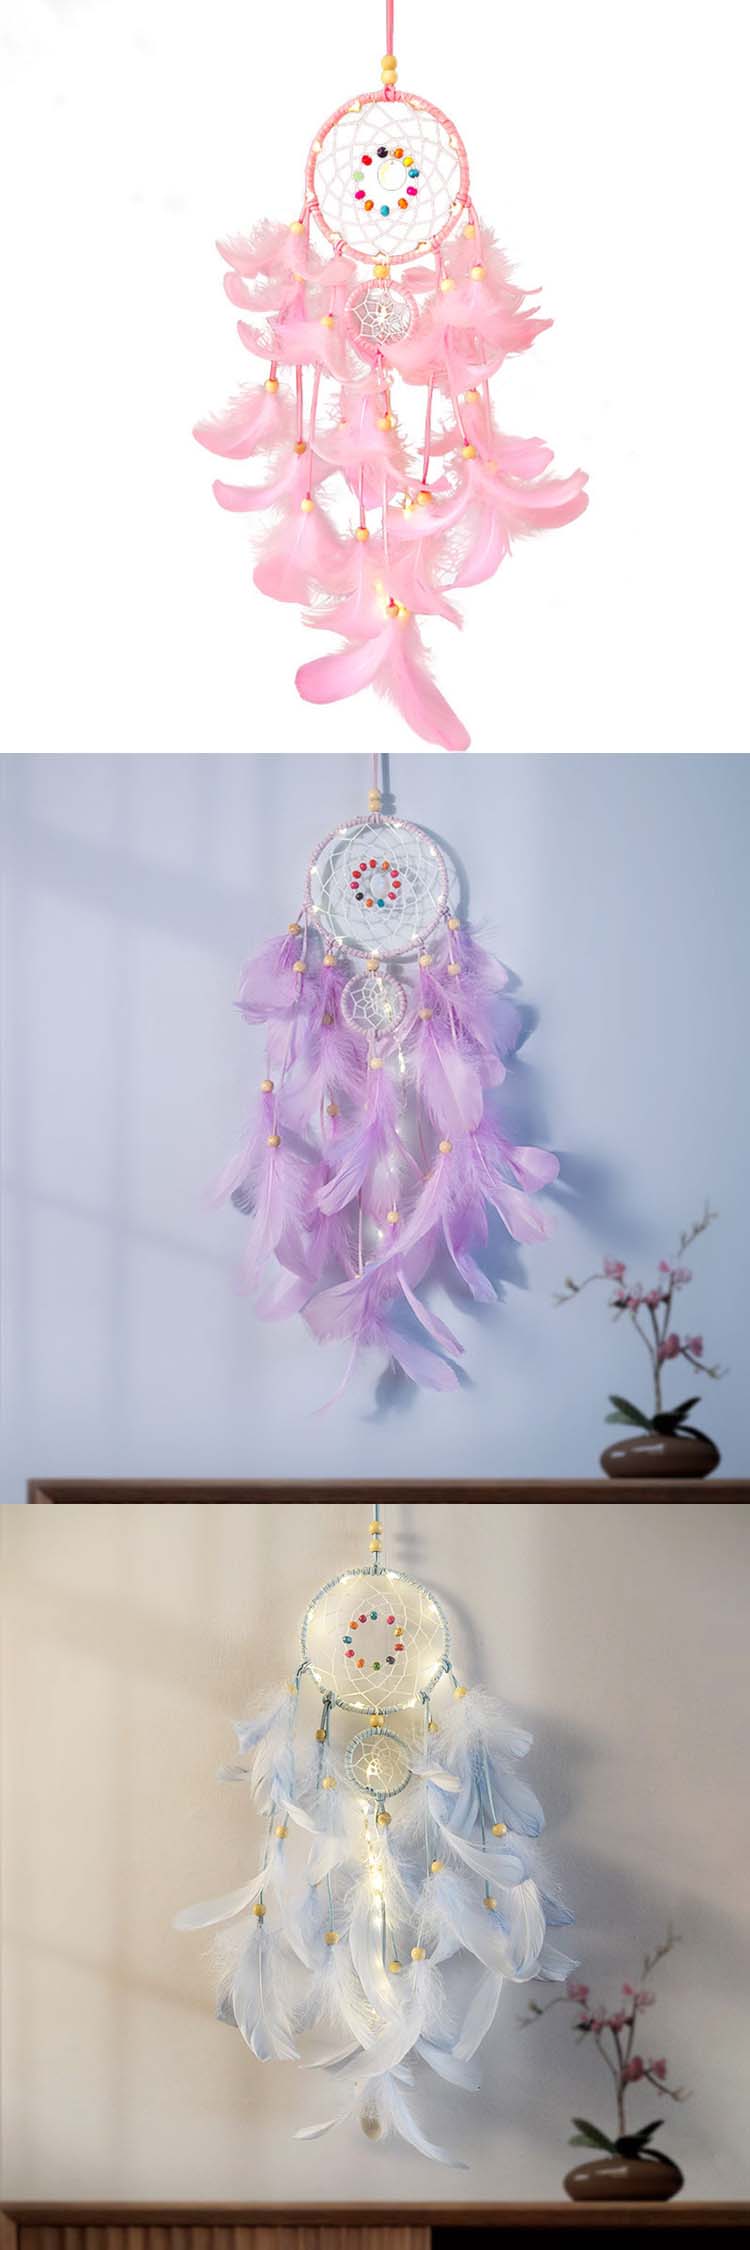 Zhe xi Dream catcher with lamp string innovates home decoration